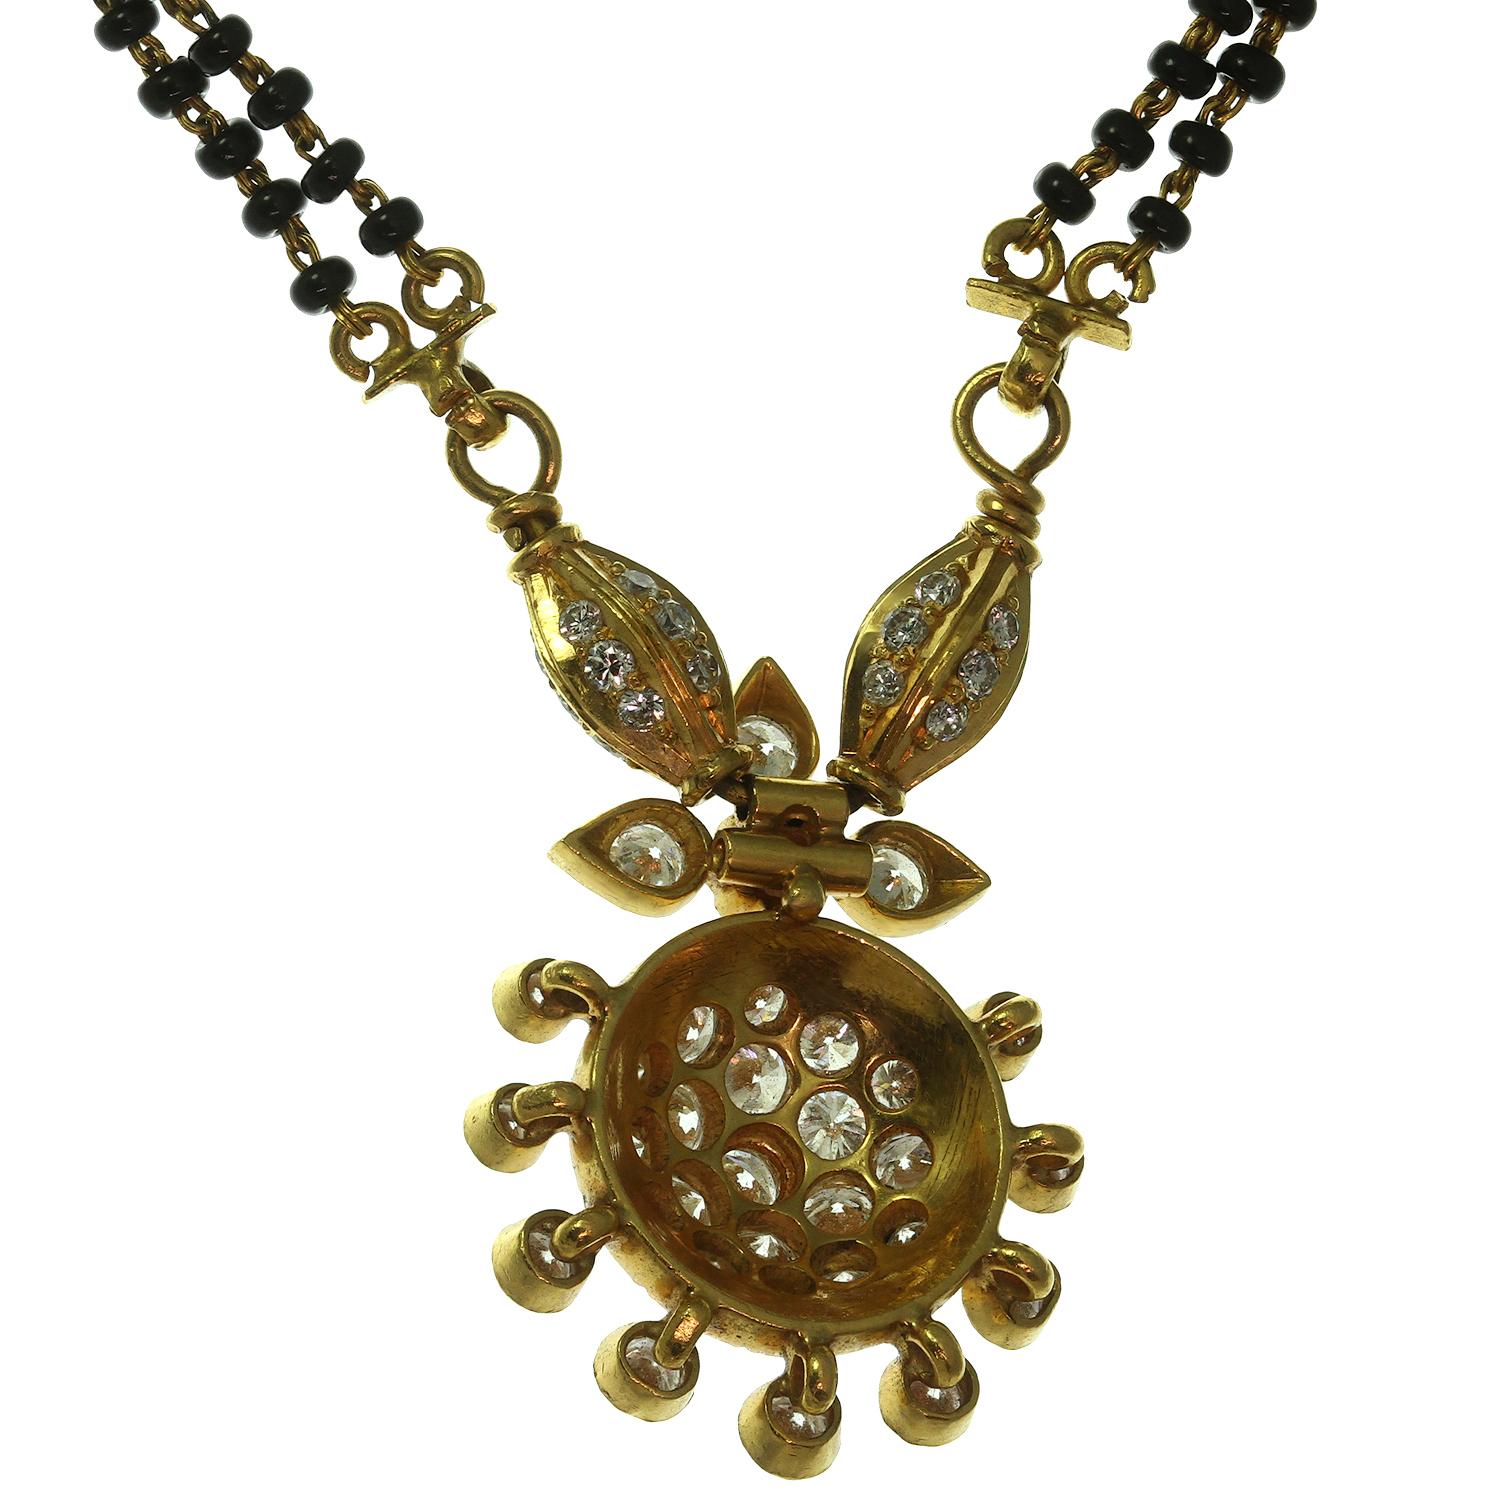 Mangalsutra Diamond Onyx Bead 22 Karat Gold Indian Bridal Handmade Necklace In New Condition For Sale In New York, NY